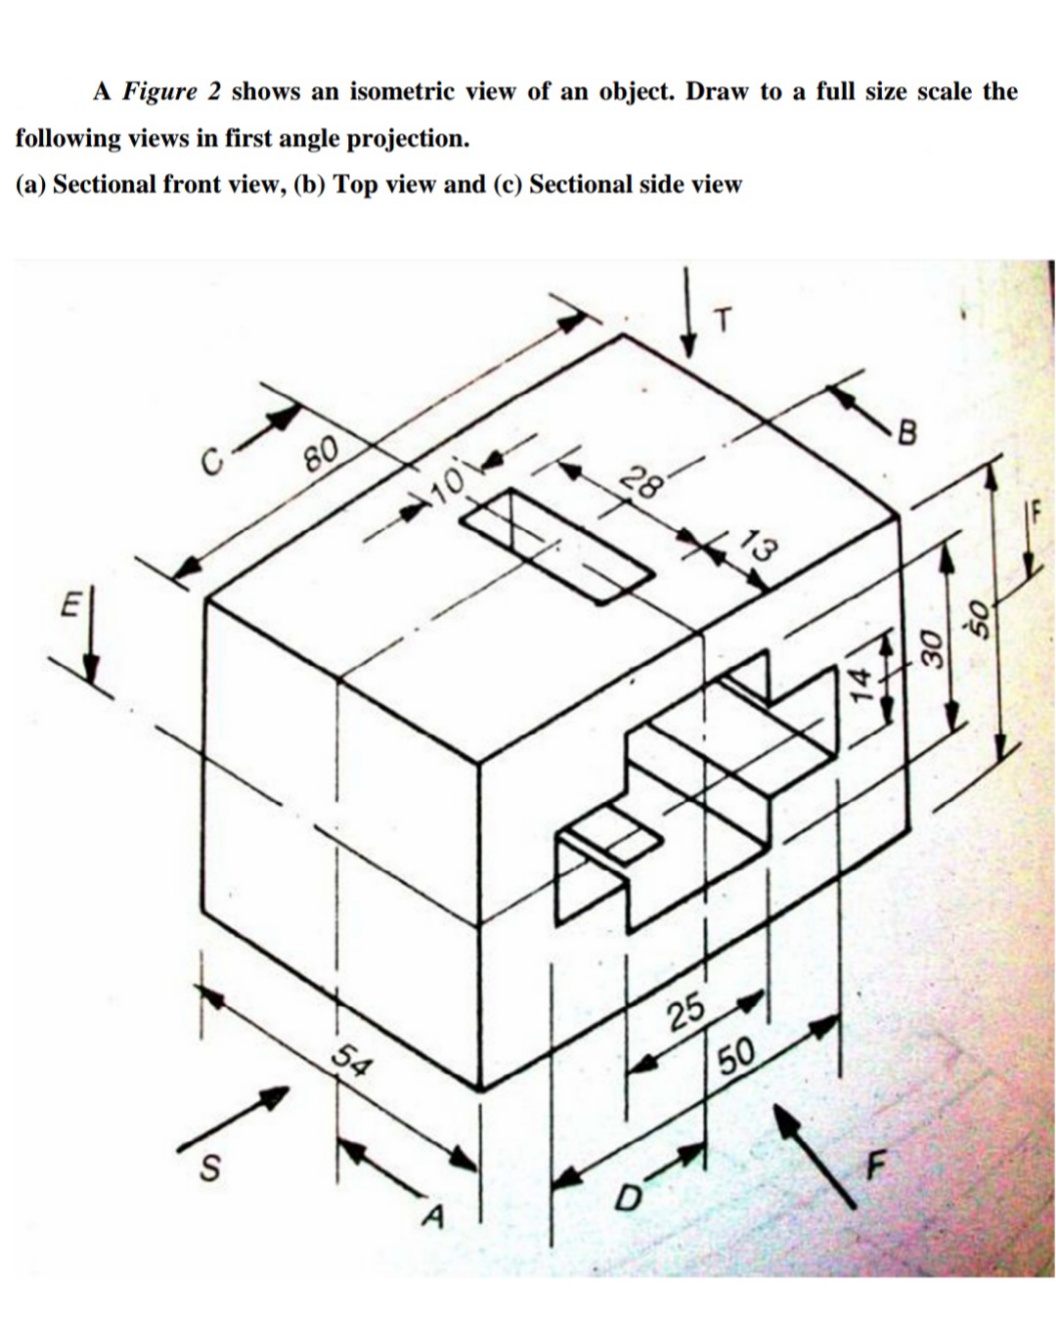 A Figure 2 shows an isometric view of an object. Draw to a full size scale the
following views in first angle projection.
(a) Sectional front view, (b) Top view and (c) Sectional side view
C
80
B
28
10
54
50
S
25
